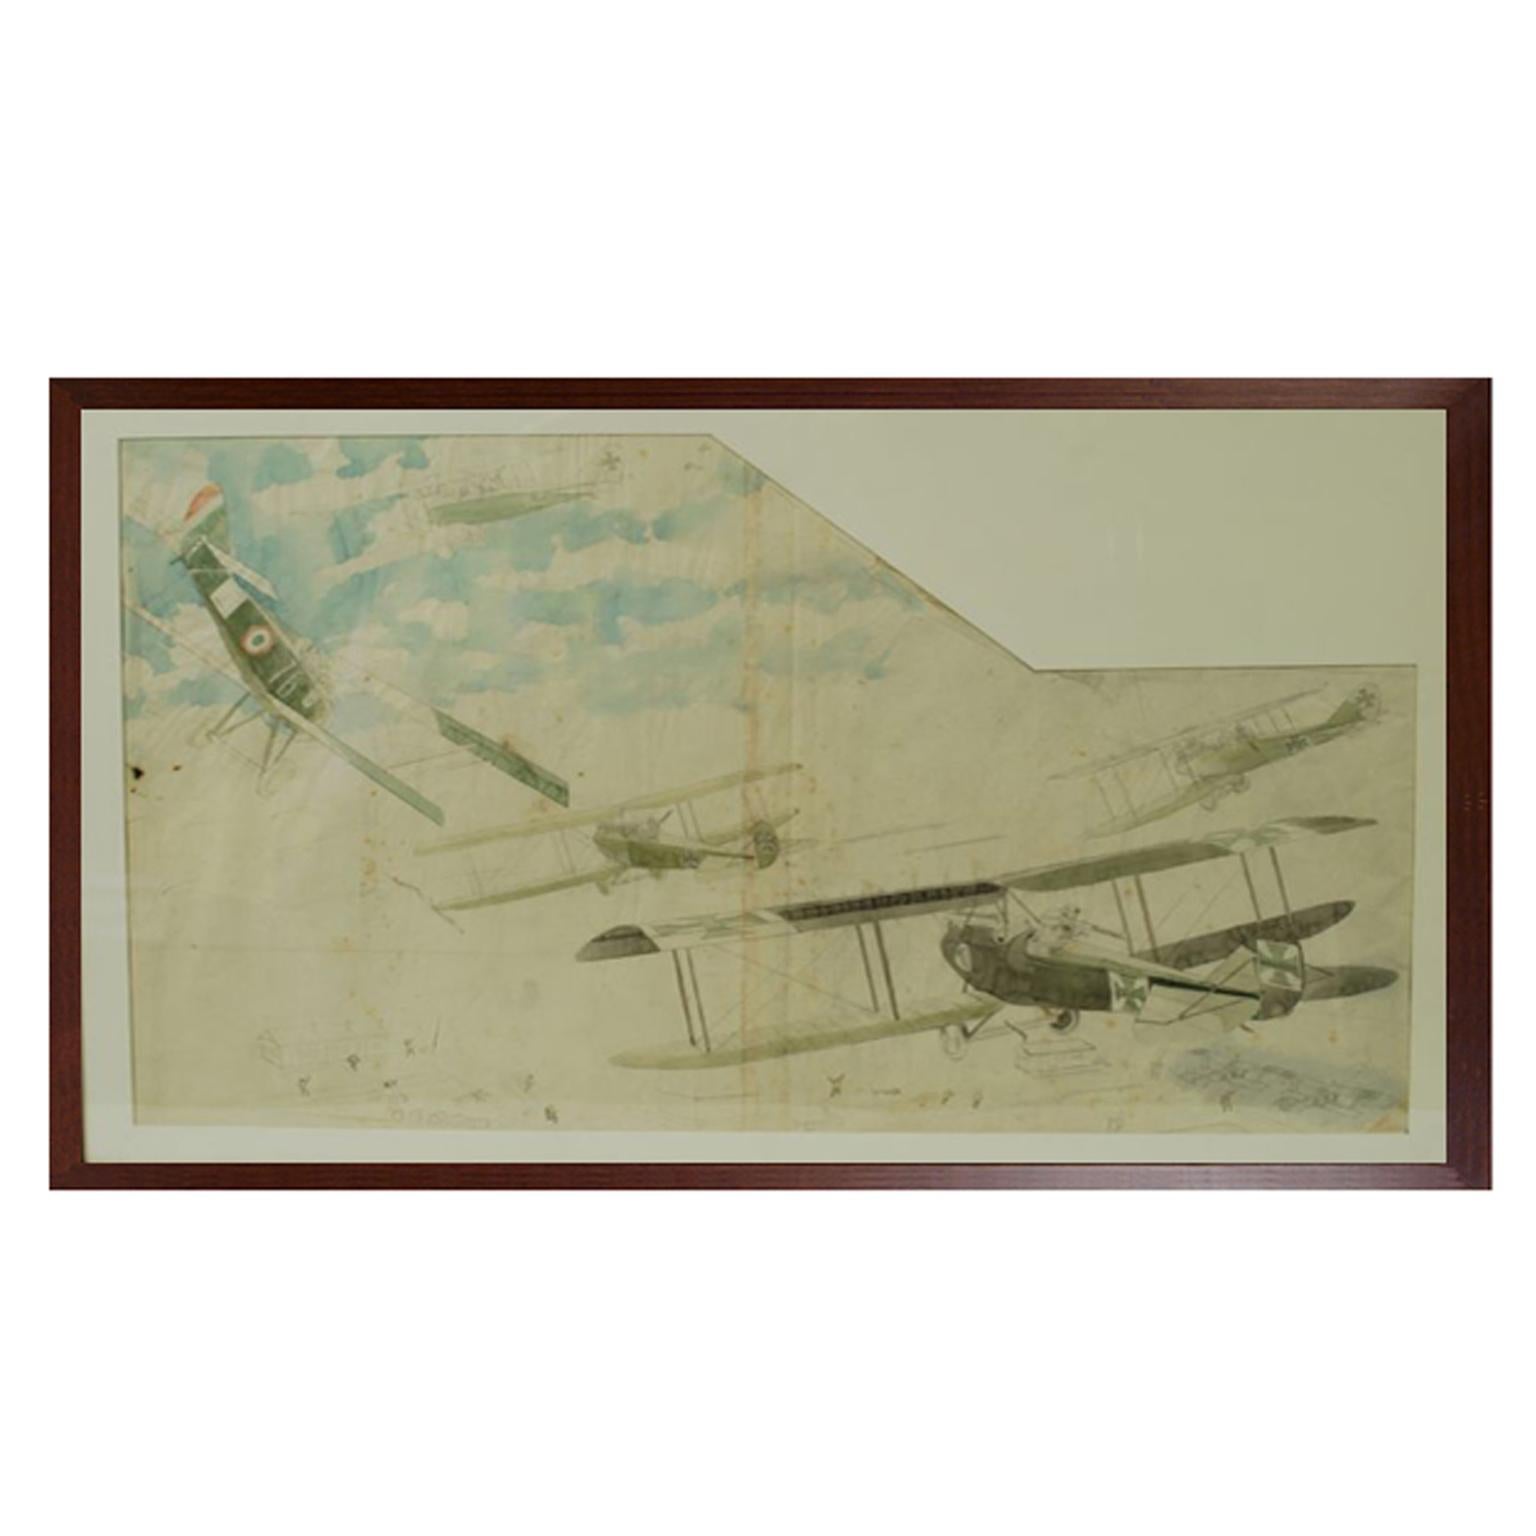 Watercolor and pencil drawing by Riccardo Cavigioli that depicts five fighting biplanes; the scene describes the attack against an Italian camp. On the left= single-seater biplane fighter Hanriot HD 1 produced under license by Macchi in 1916. On the